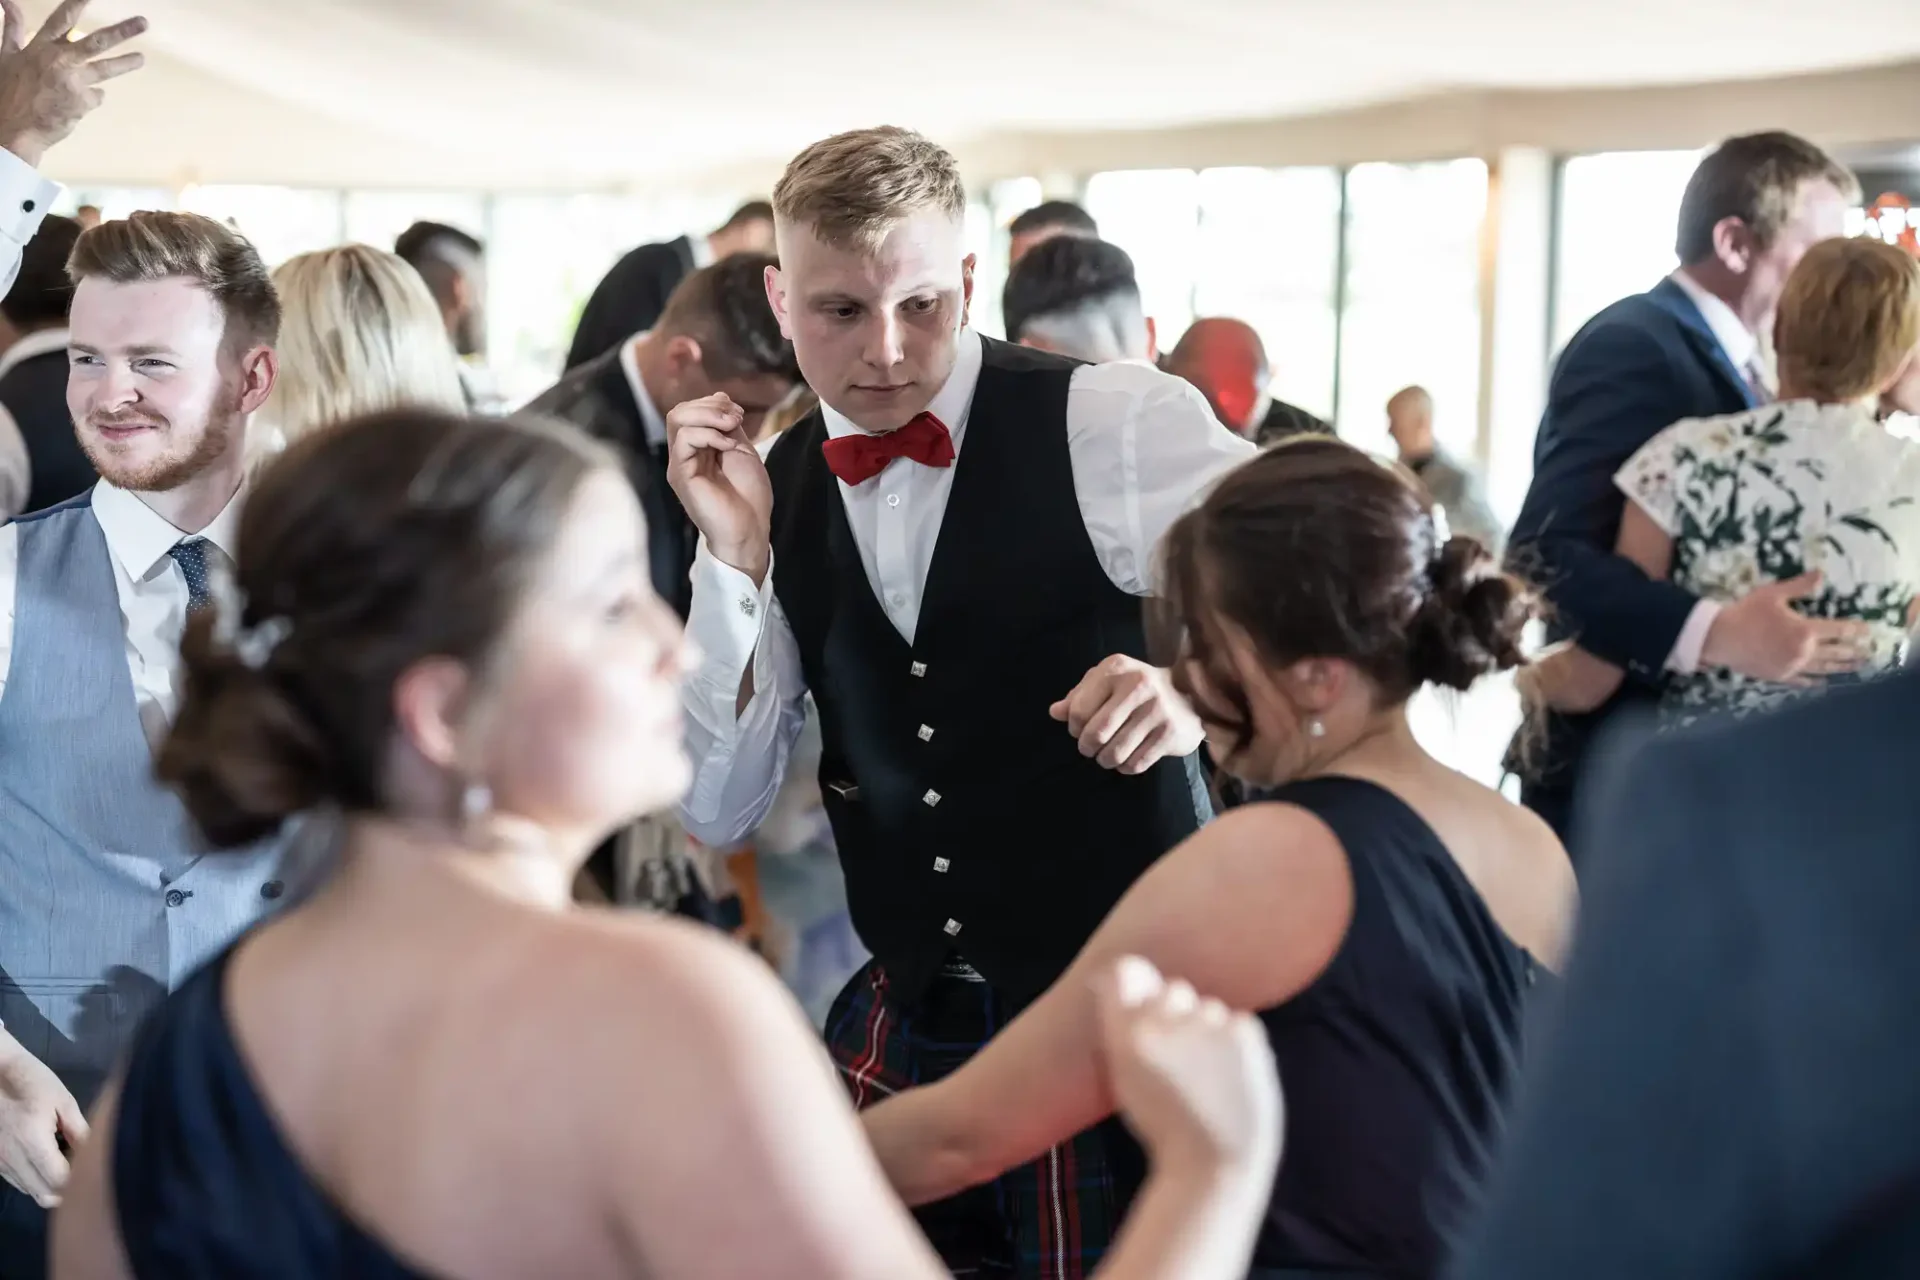 Young man in a vest and kilt dancing with a woman in a blue dress at a lively wedding reception.